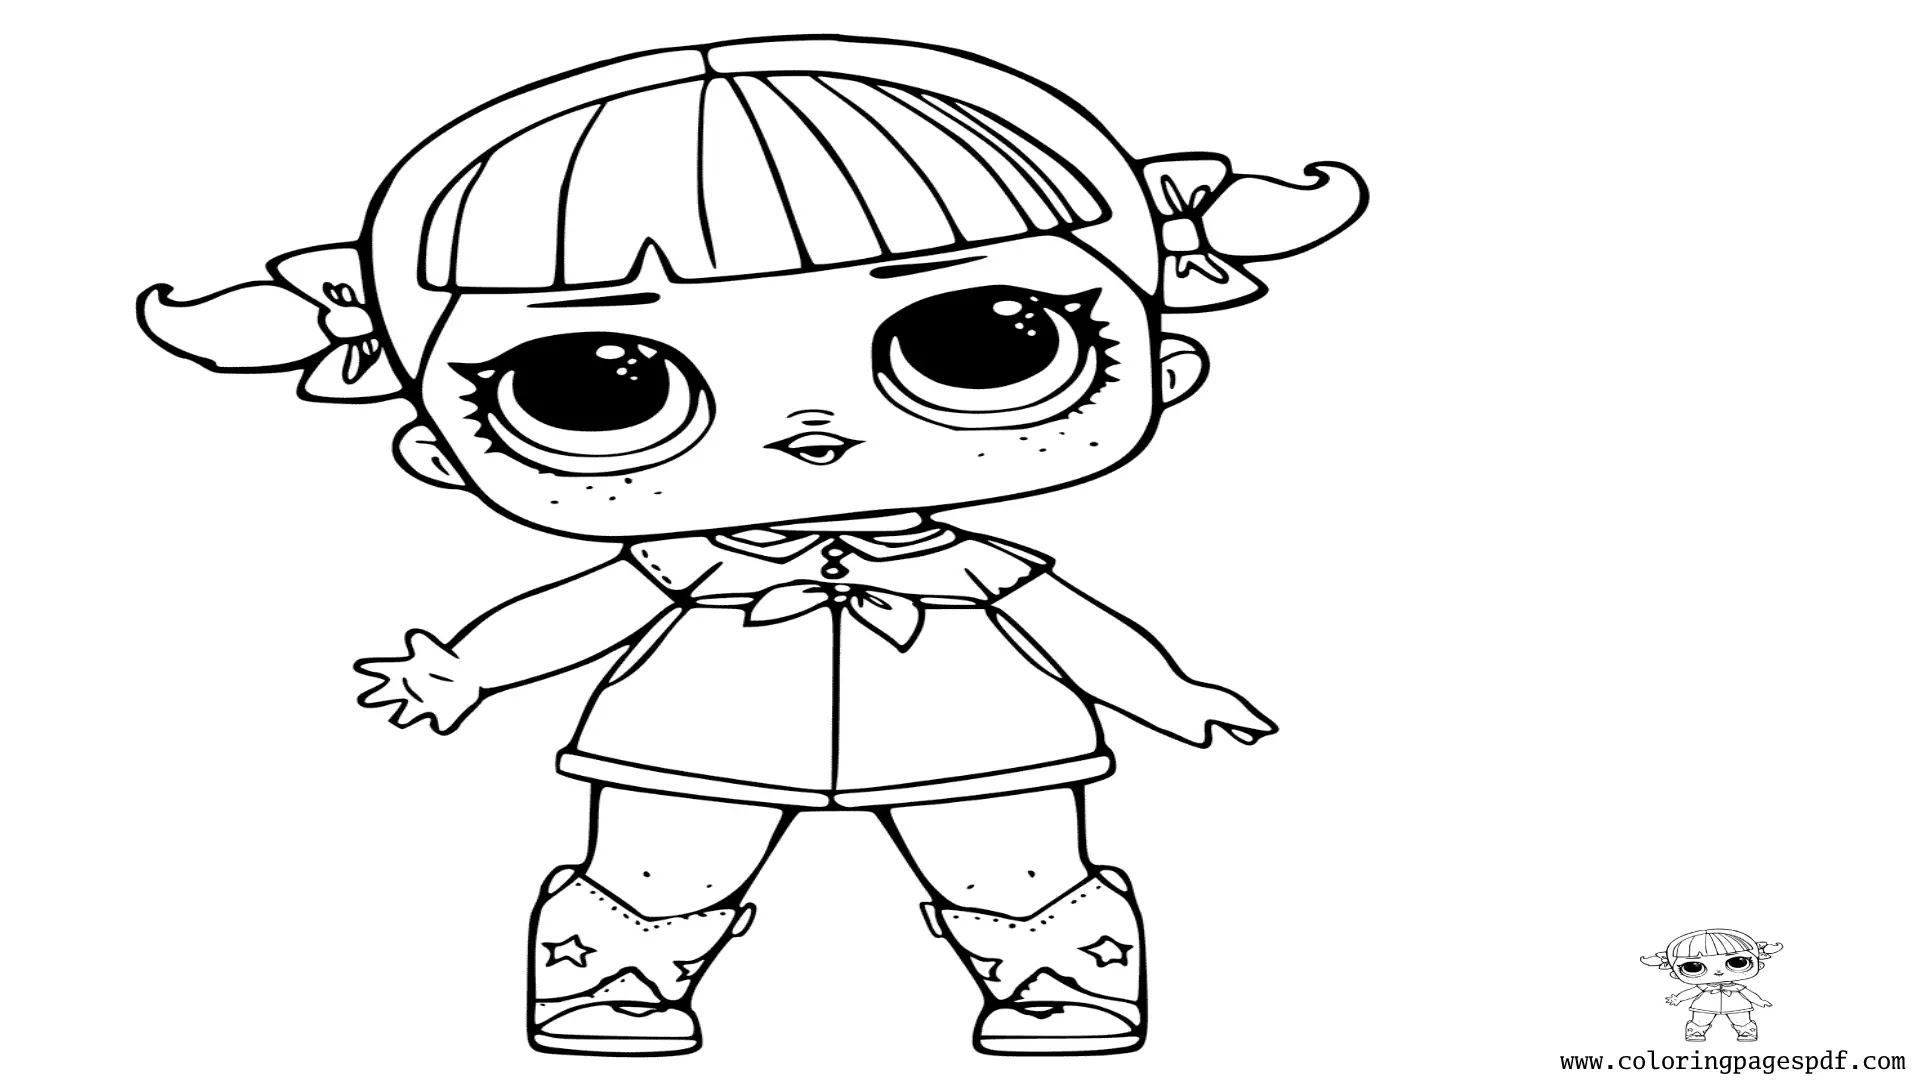 Coloring Pages Of Cherry